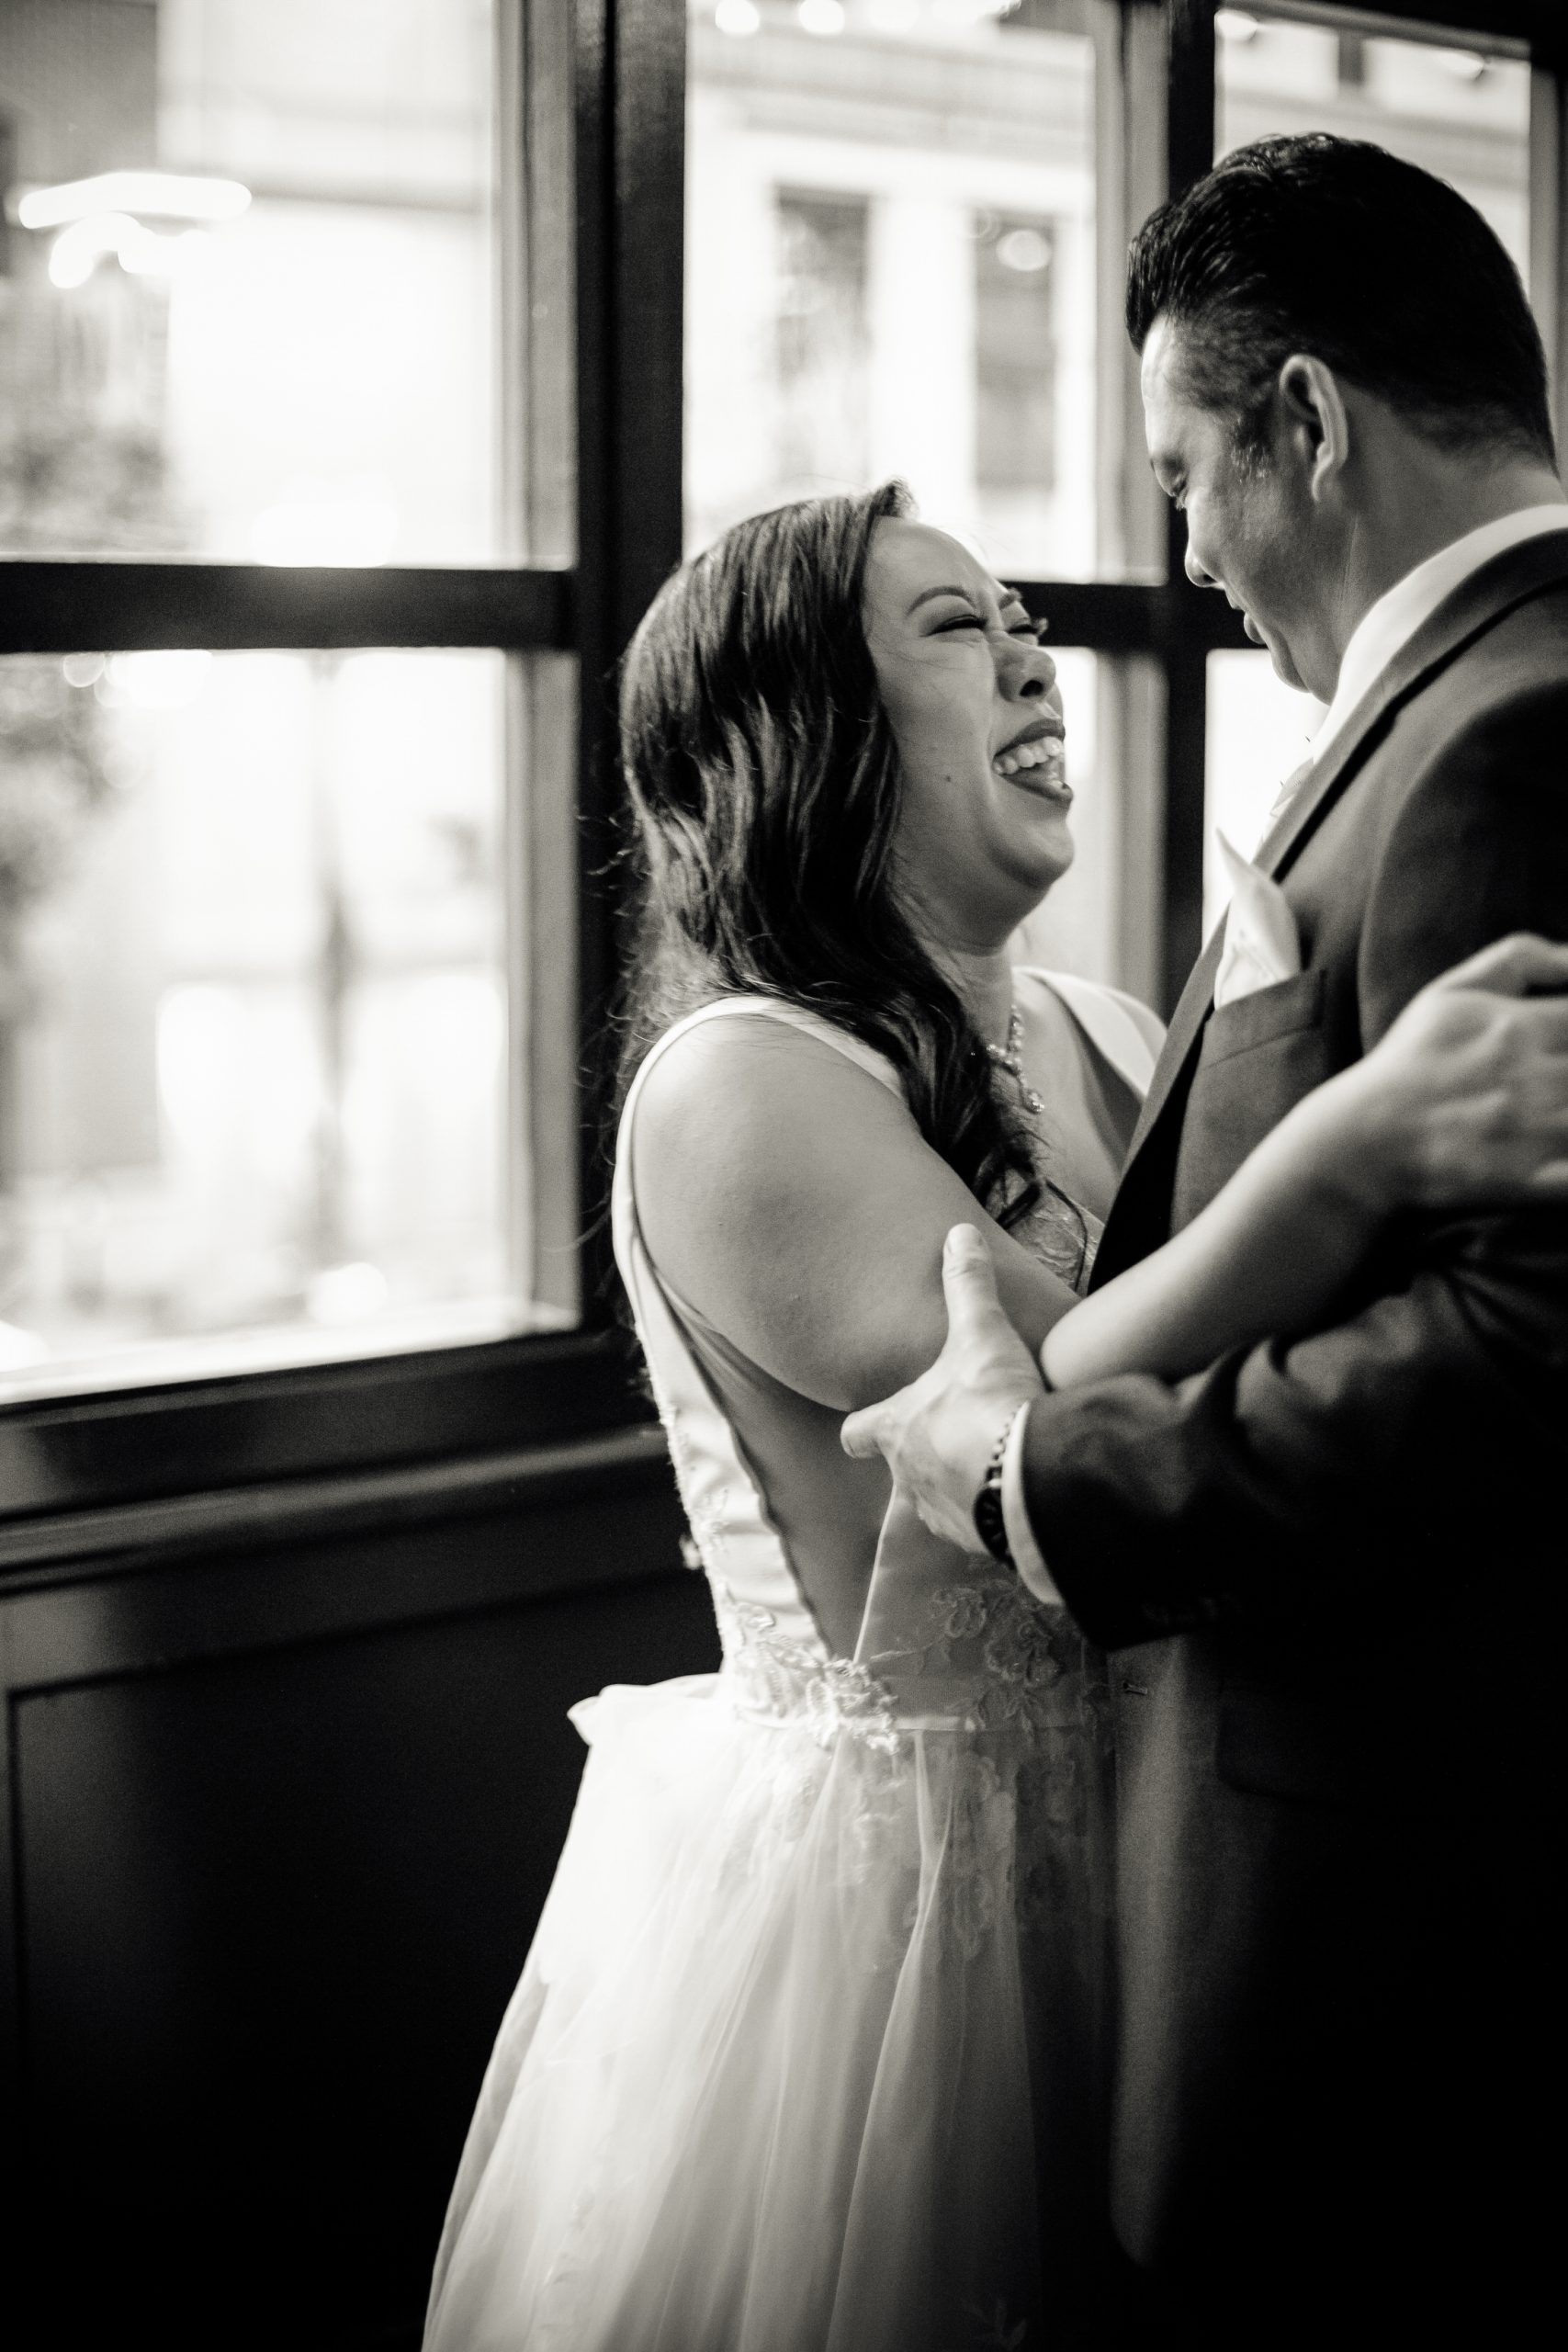 Intimate portraits of the bride and groom.